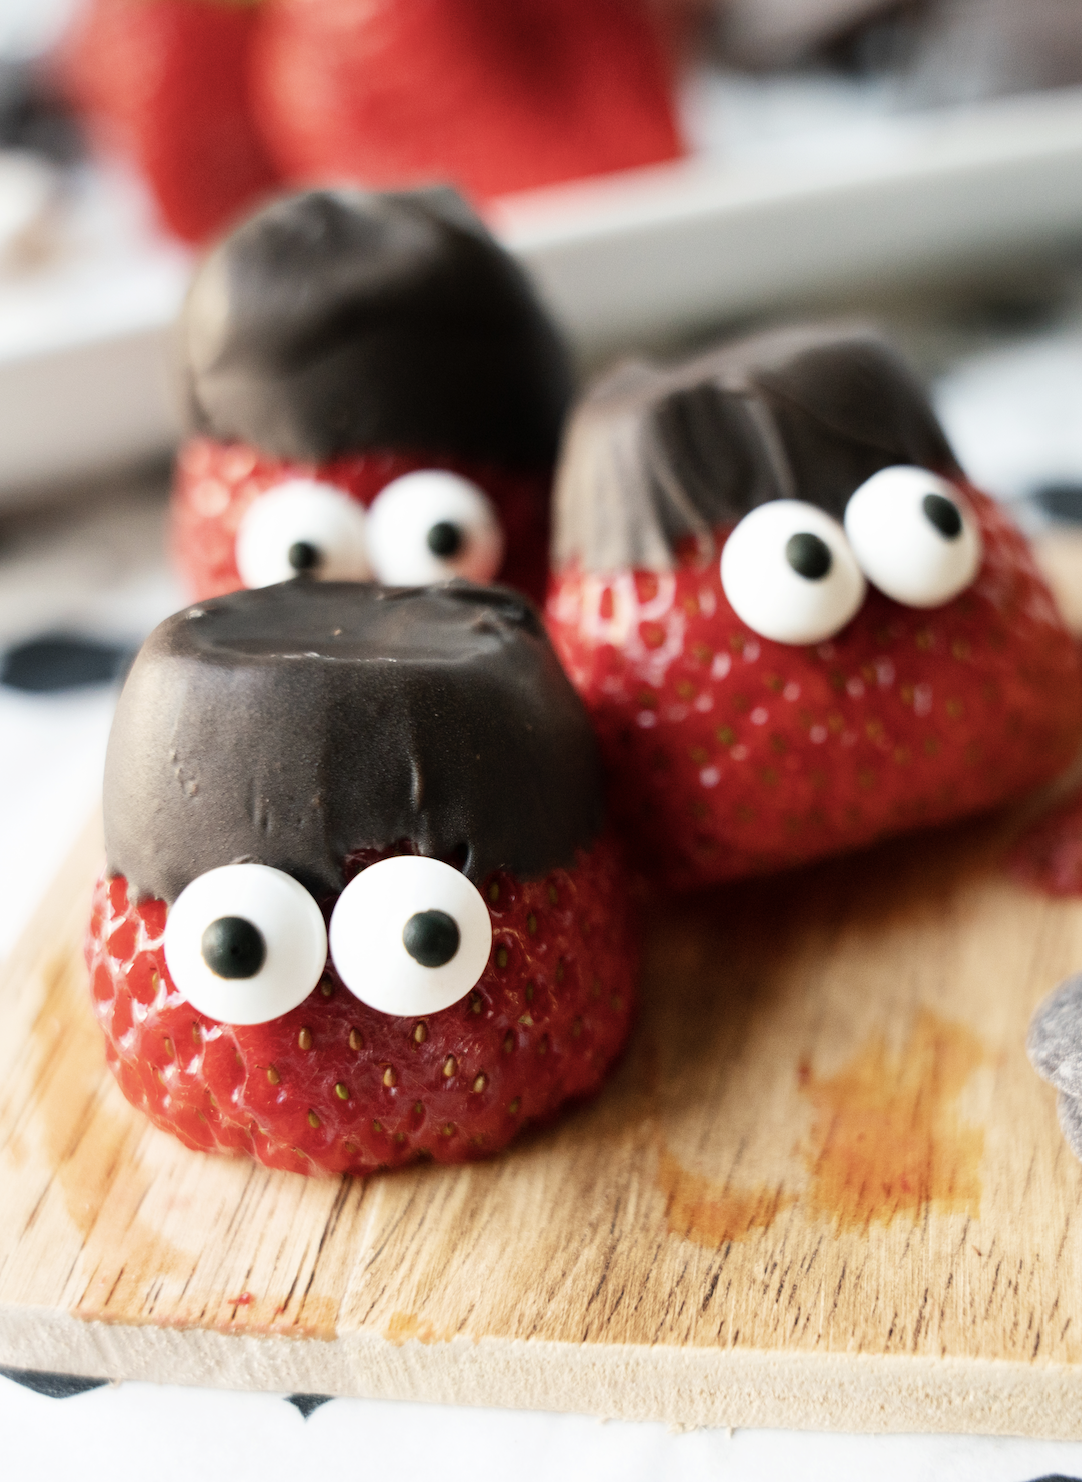 Chocolate covered strawberries at the top with candy eyes